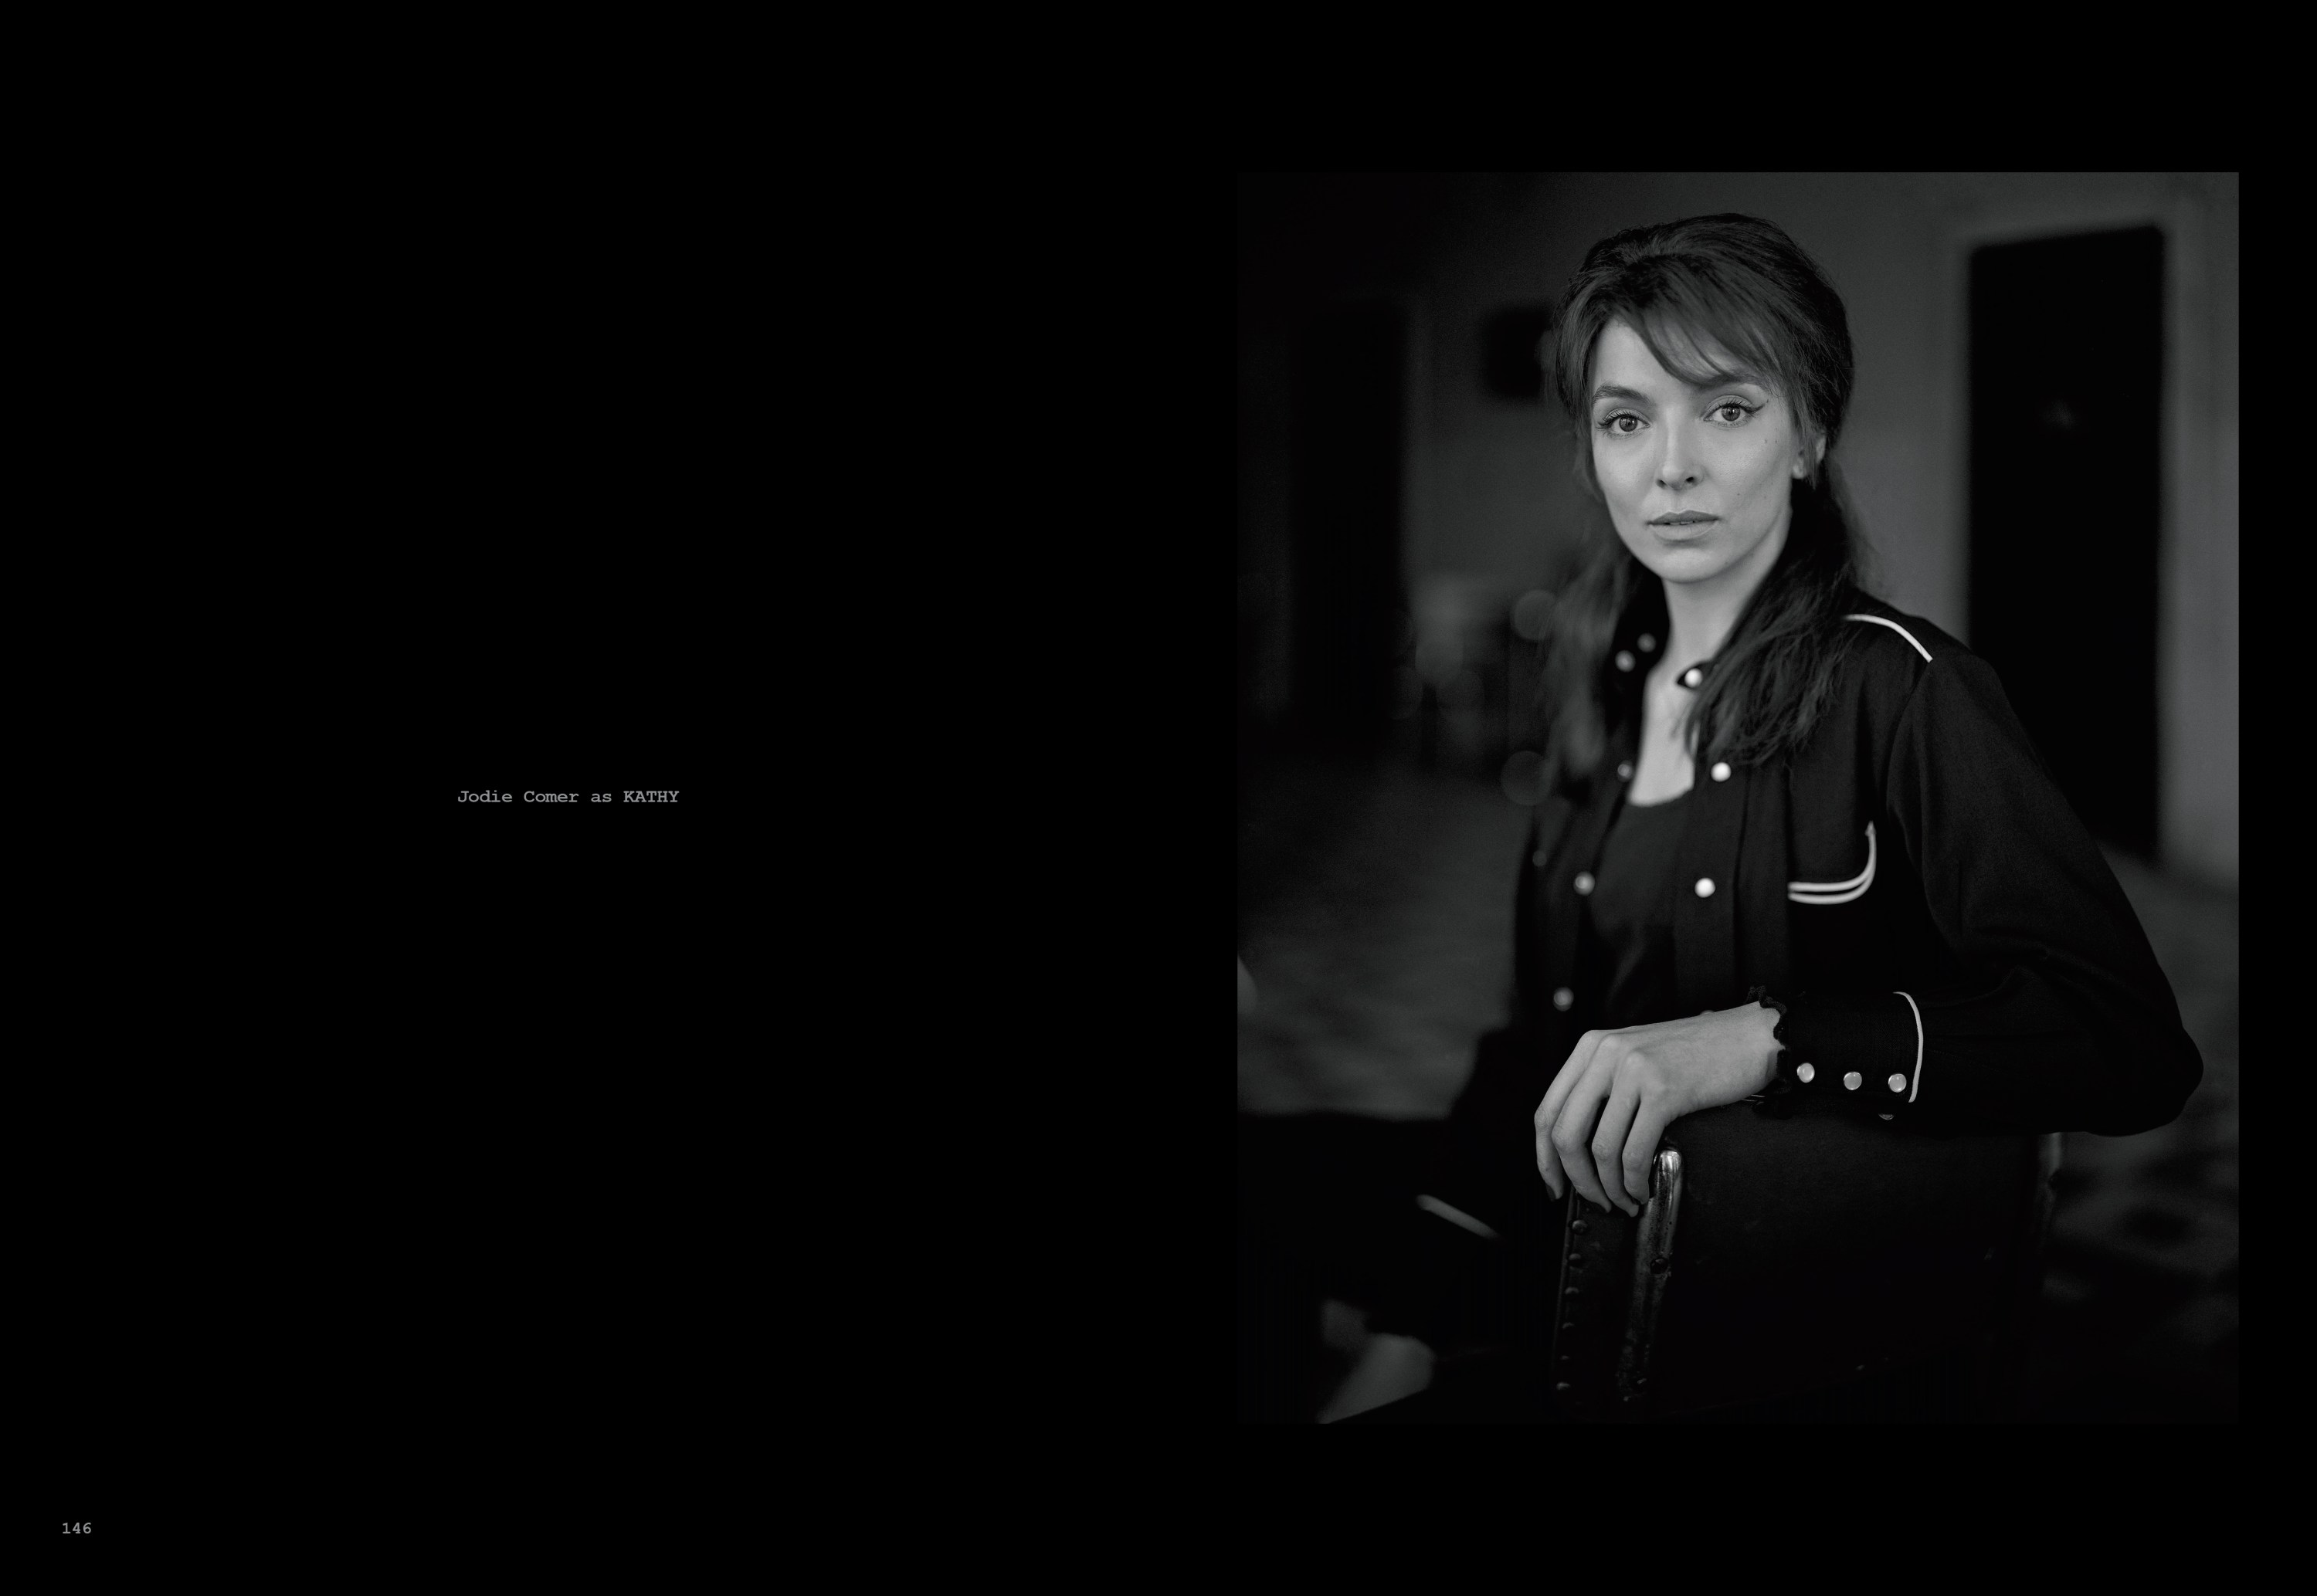 Jodie Comer as seen in the new book 'Vandals: The Photography of The Bikeriders' published by Insight Editions.